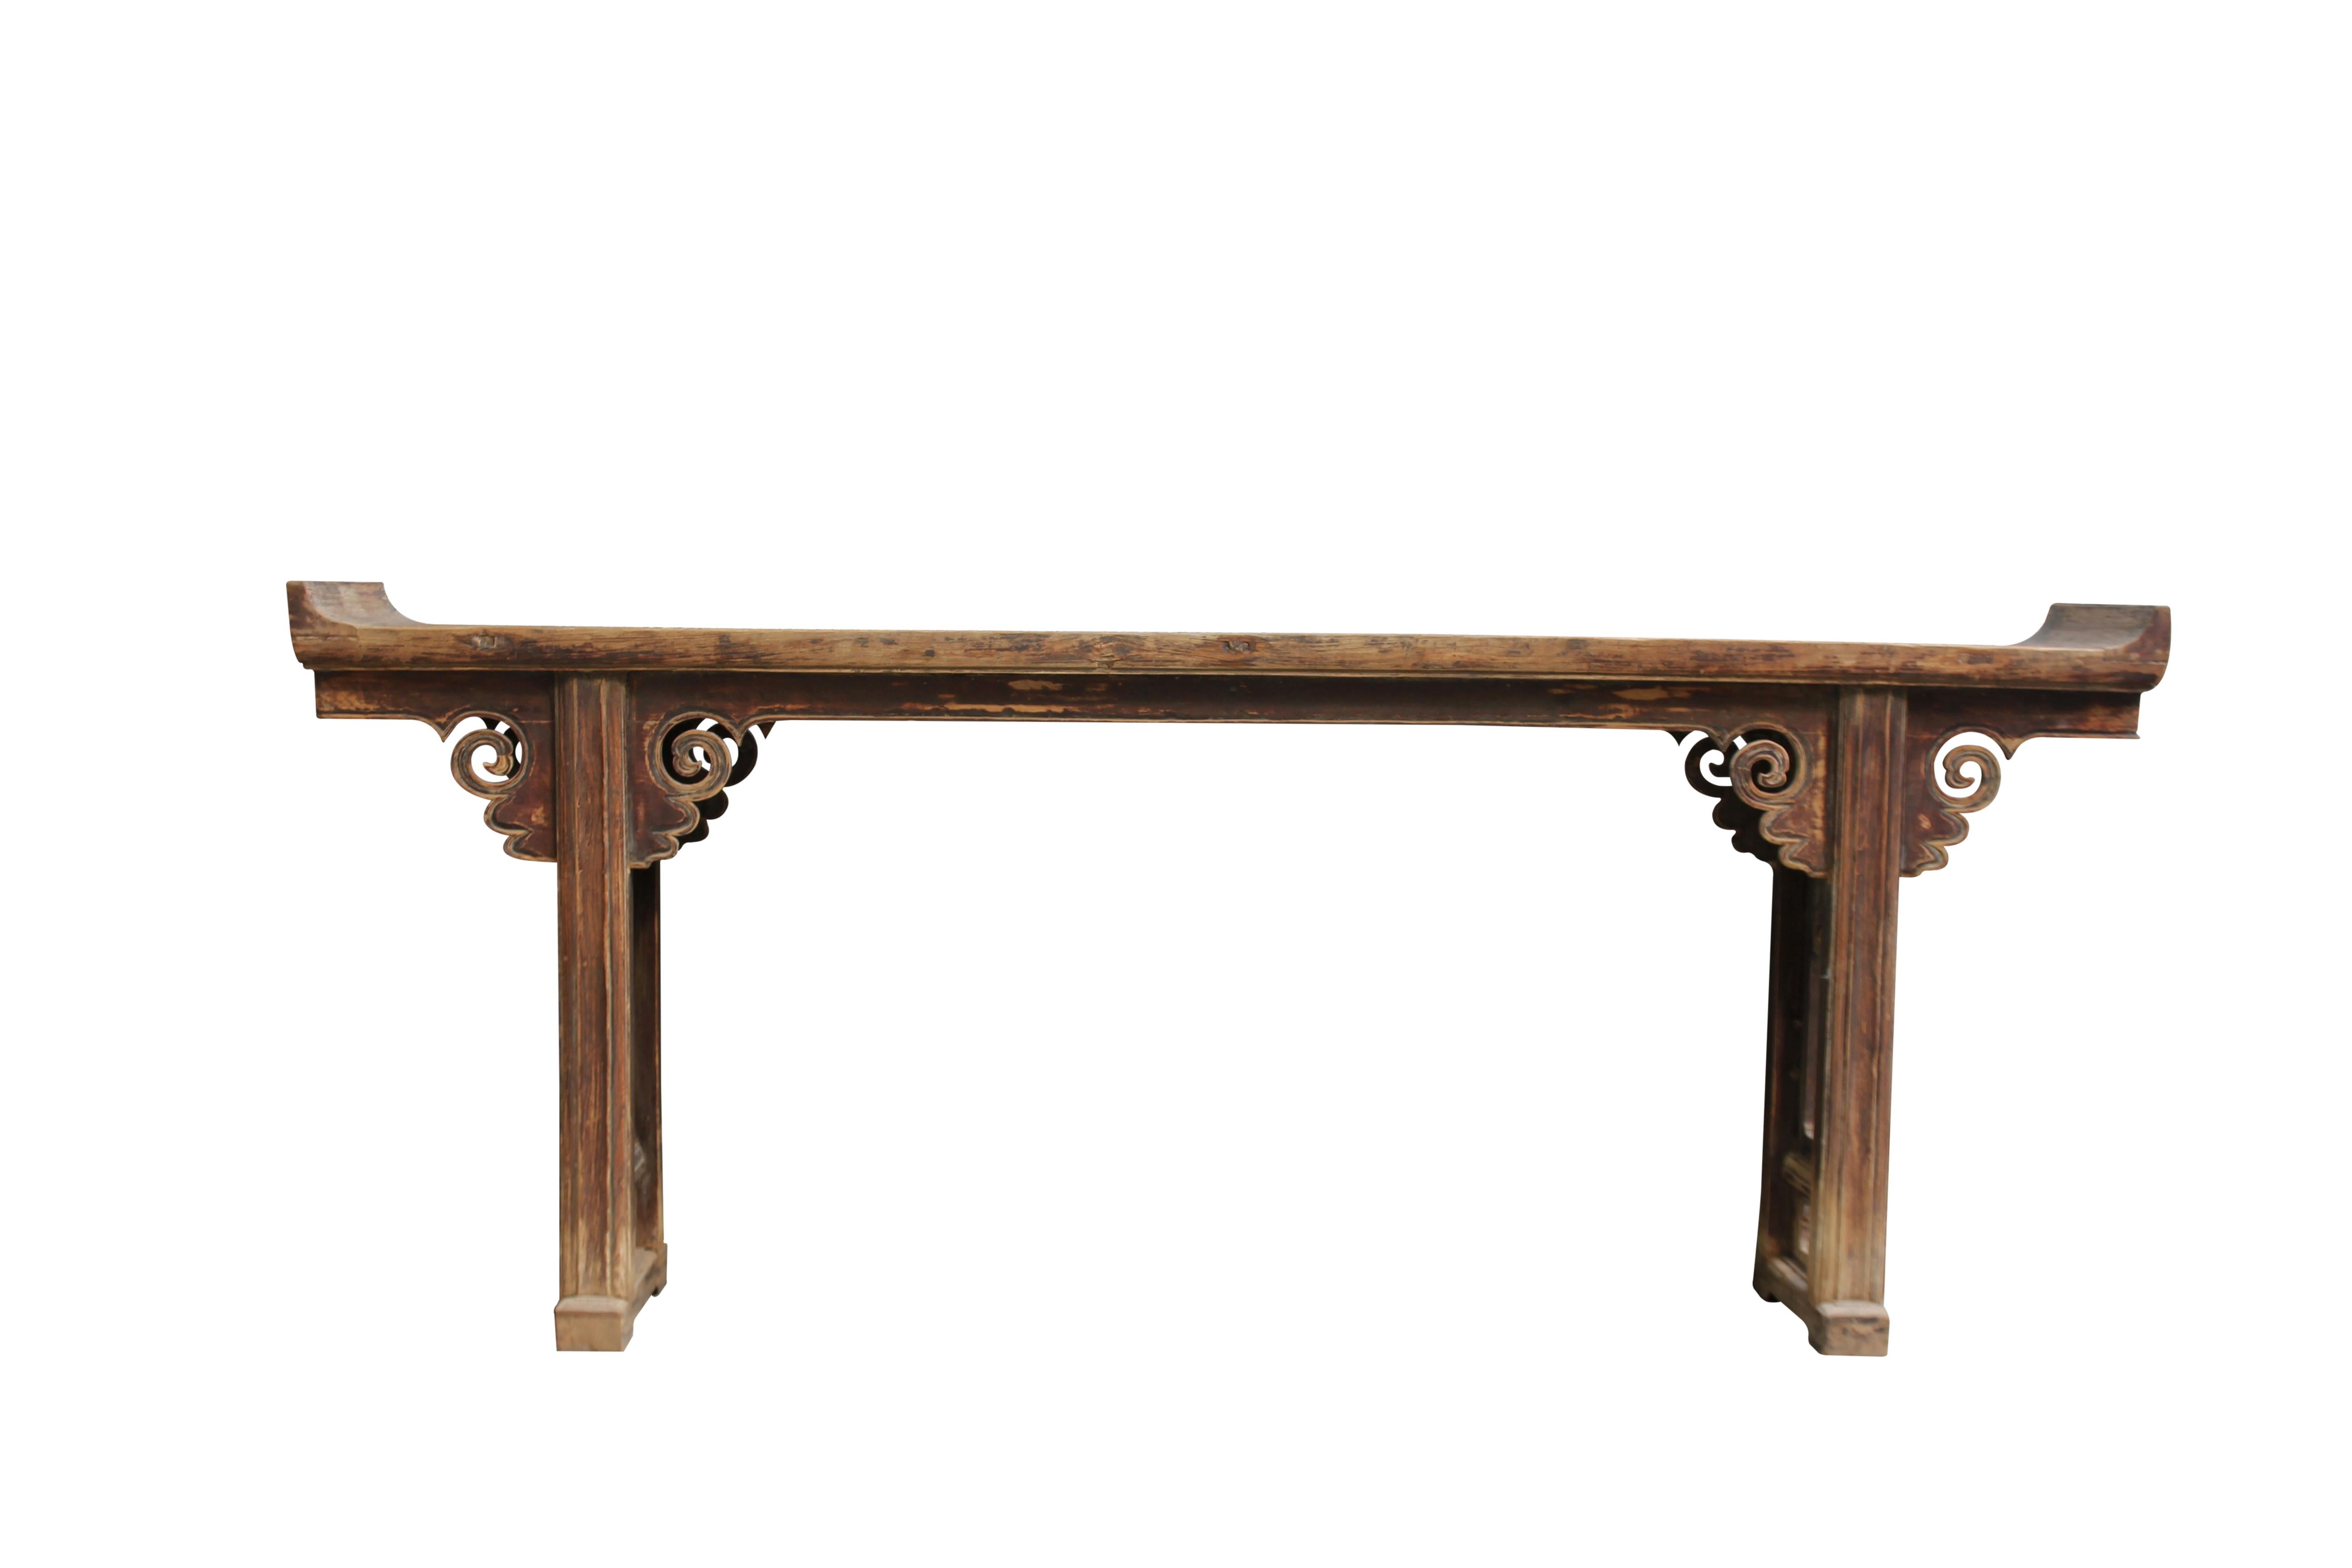 This Chinese altar table with everted ends features carved cloud spandrels on both front and back and open carved panel legs. With hand carved spandrels and panel legs, beautiful aged top, and everted ends, this console table will make an impressive